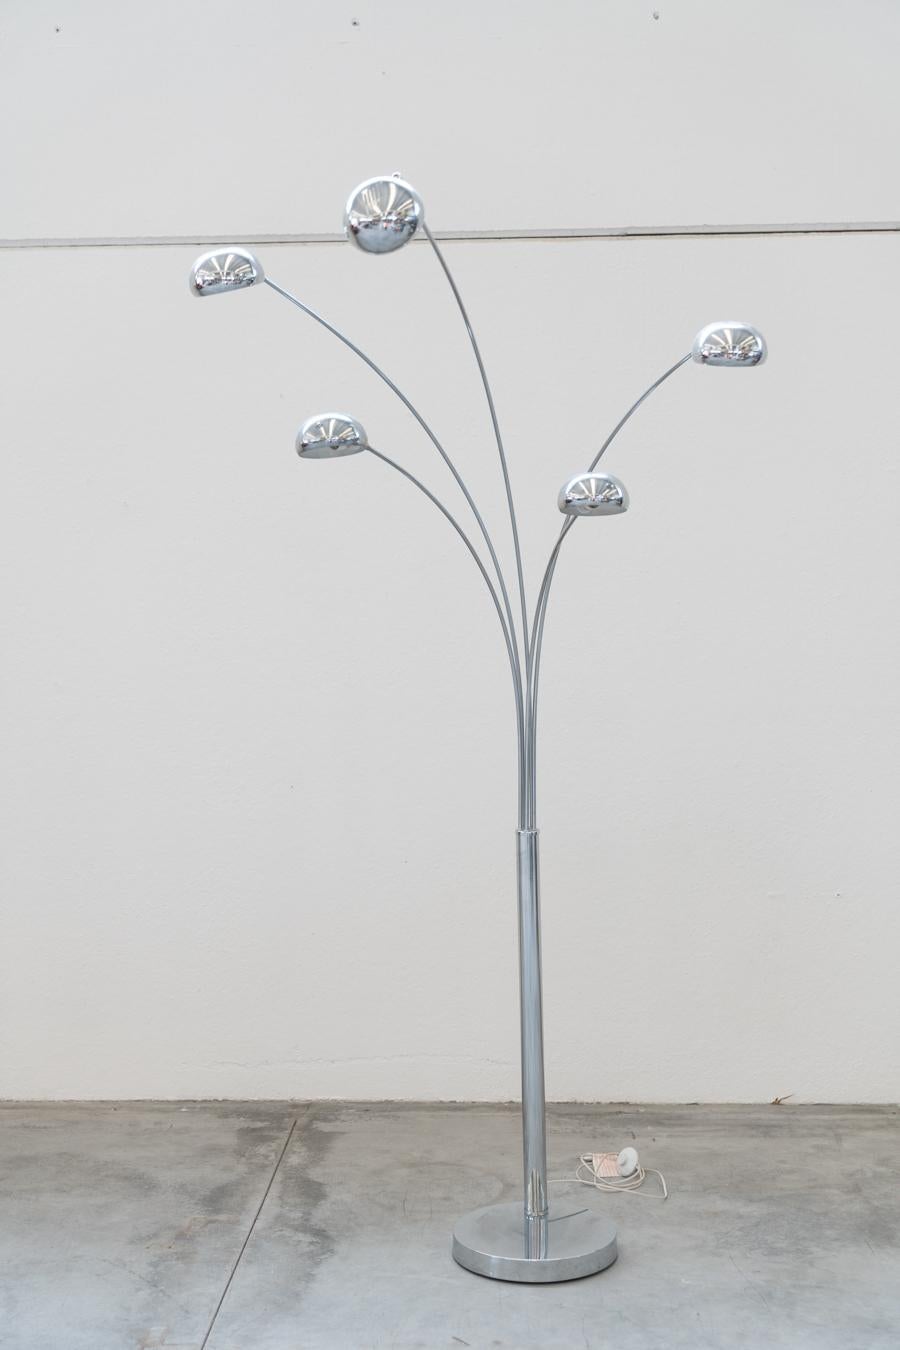 Floor lamp 5 arms Dominioni 1970
Arcuate floor lamp with original design. It is a choice 	perfect for bringing a touch of retro to the living room or bedroom 	bedroom. Made of durable metal, equipped with 5 arms 	adjustable. The solid base offers